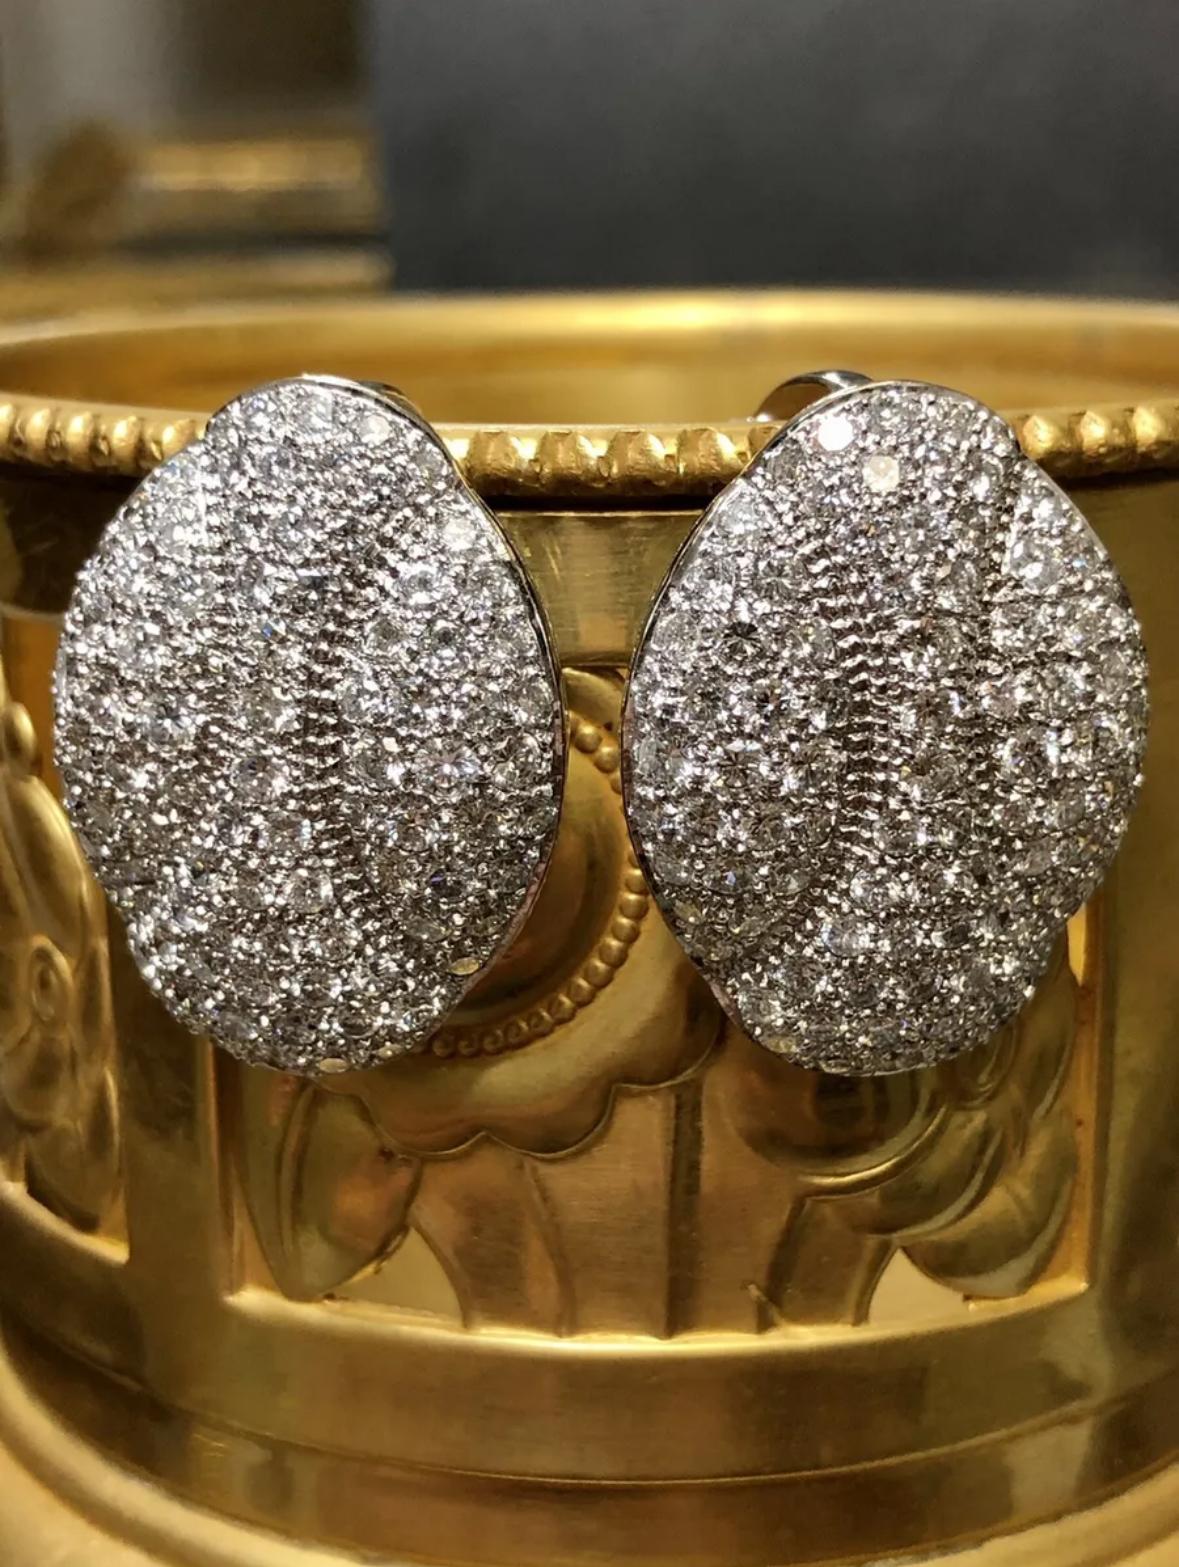 A beautifully crafted pair of large Huggie earrings done in platinum and pave set with approximately 5.50cttw in G-H color and Vs1+ clarity round diamonds. These earrings have omega backs with swing posts so that they can be worn either